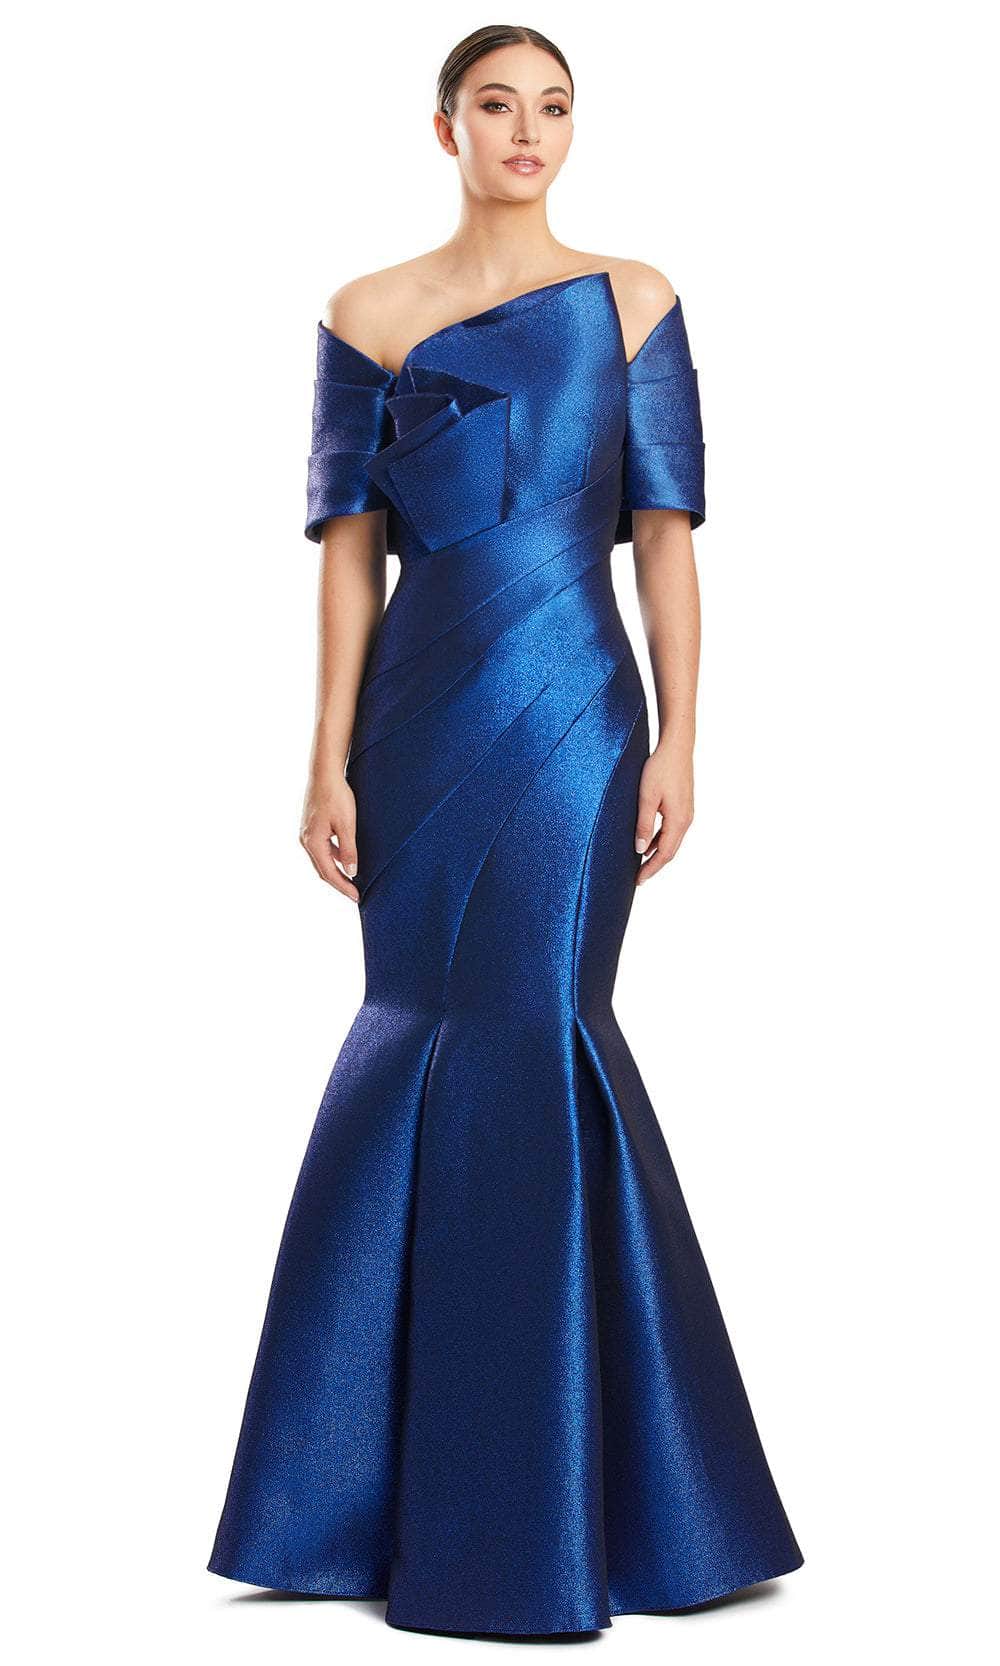 Alexander by Daymor 1879F23 - Pleated Detail Mermaid Evening Dress Special Occasion Dresses